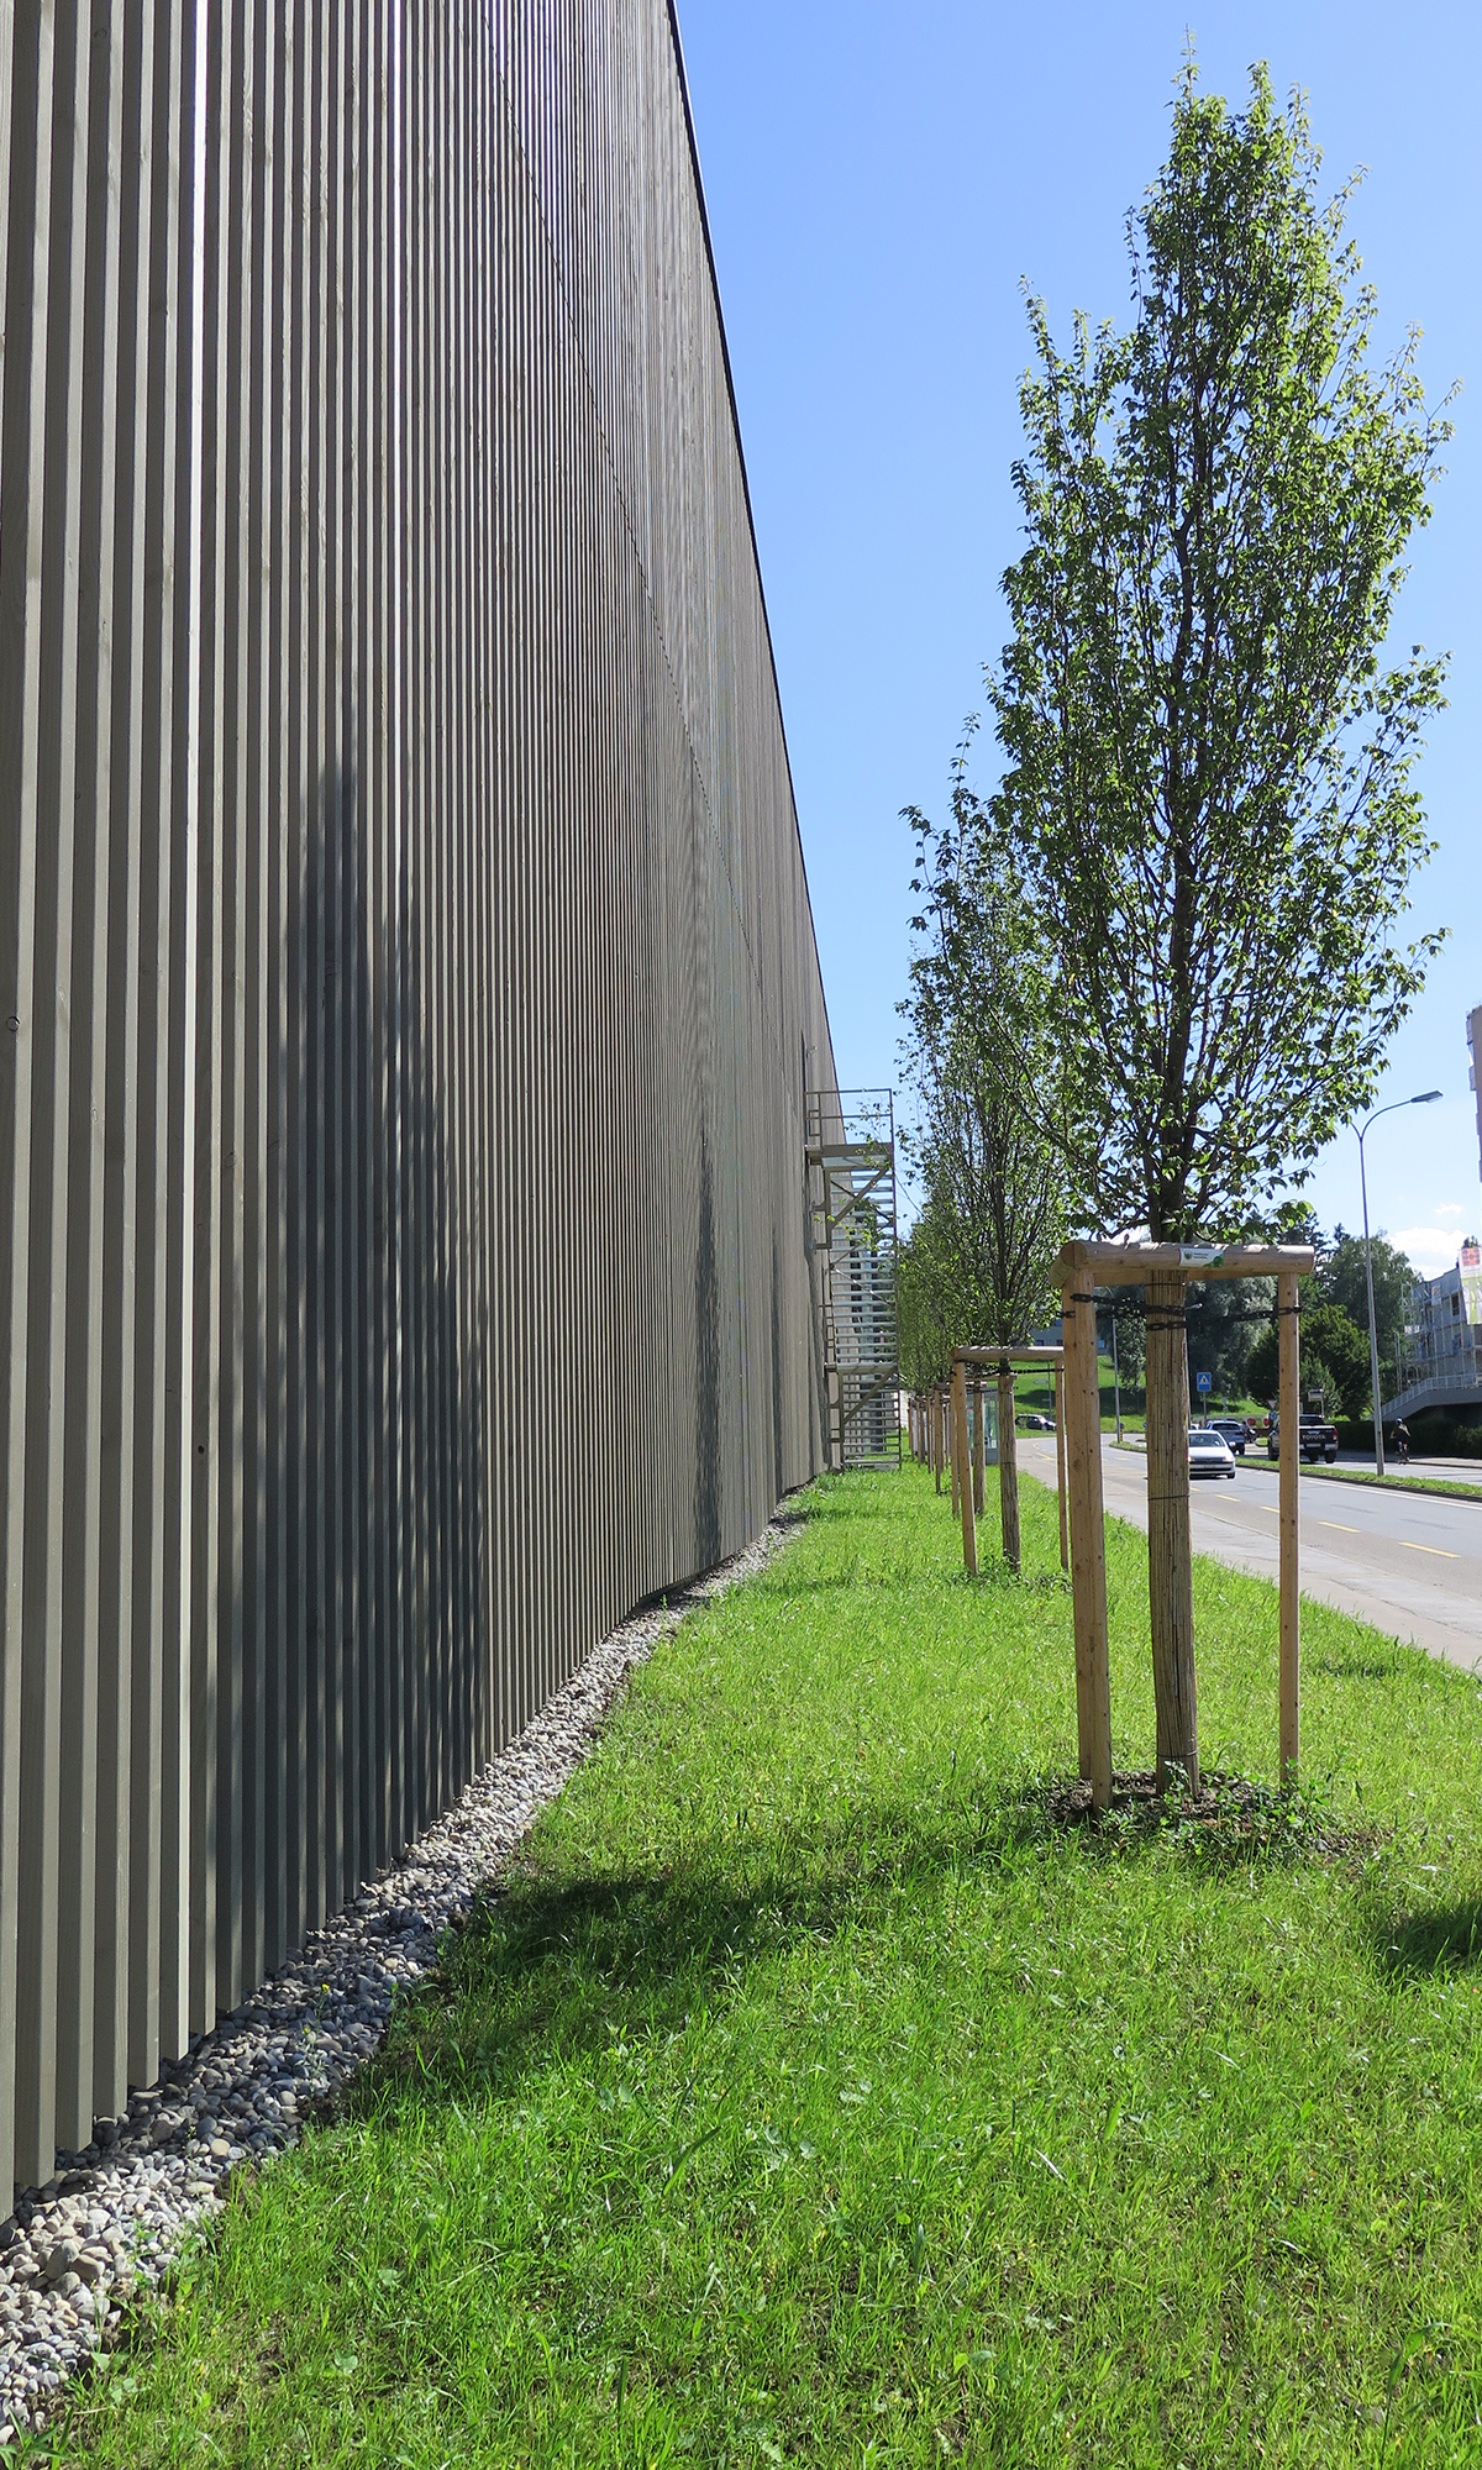 Side view of the Coop Super Center in Uzwil with pre-greyed timber facade and planting.